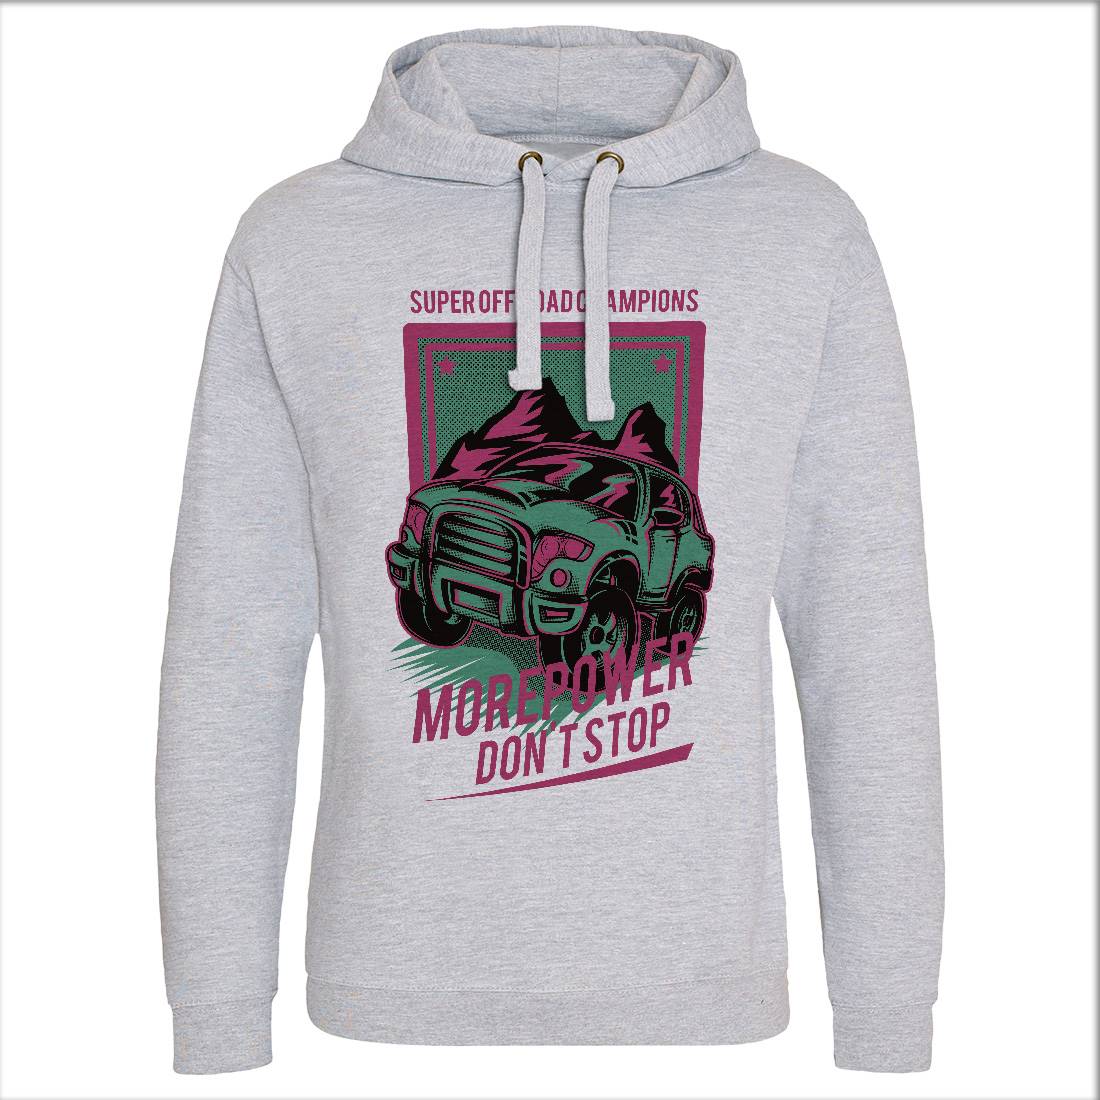 More Power Mens Hoodie Without Pocket Cars D657